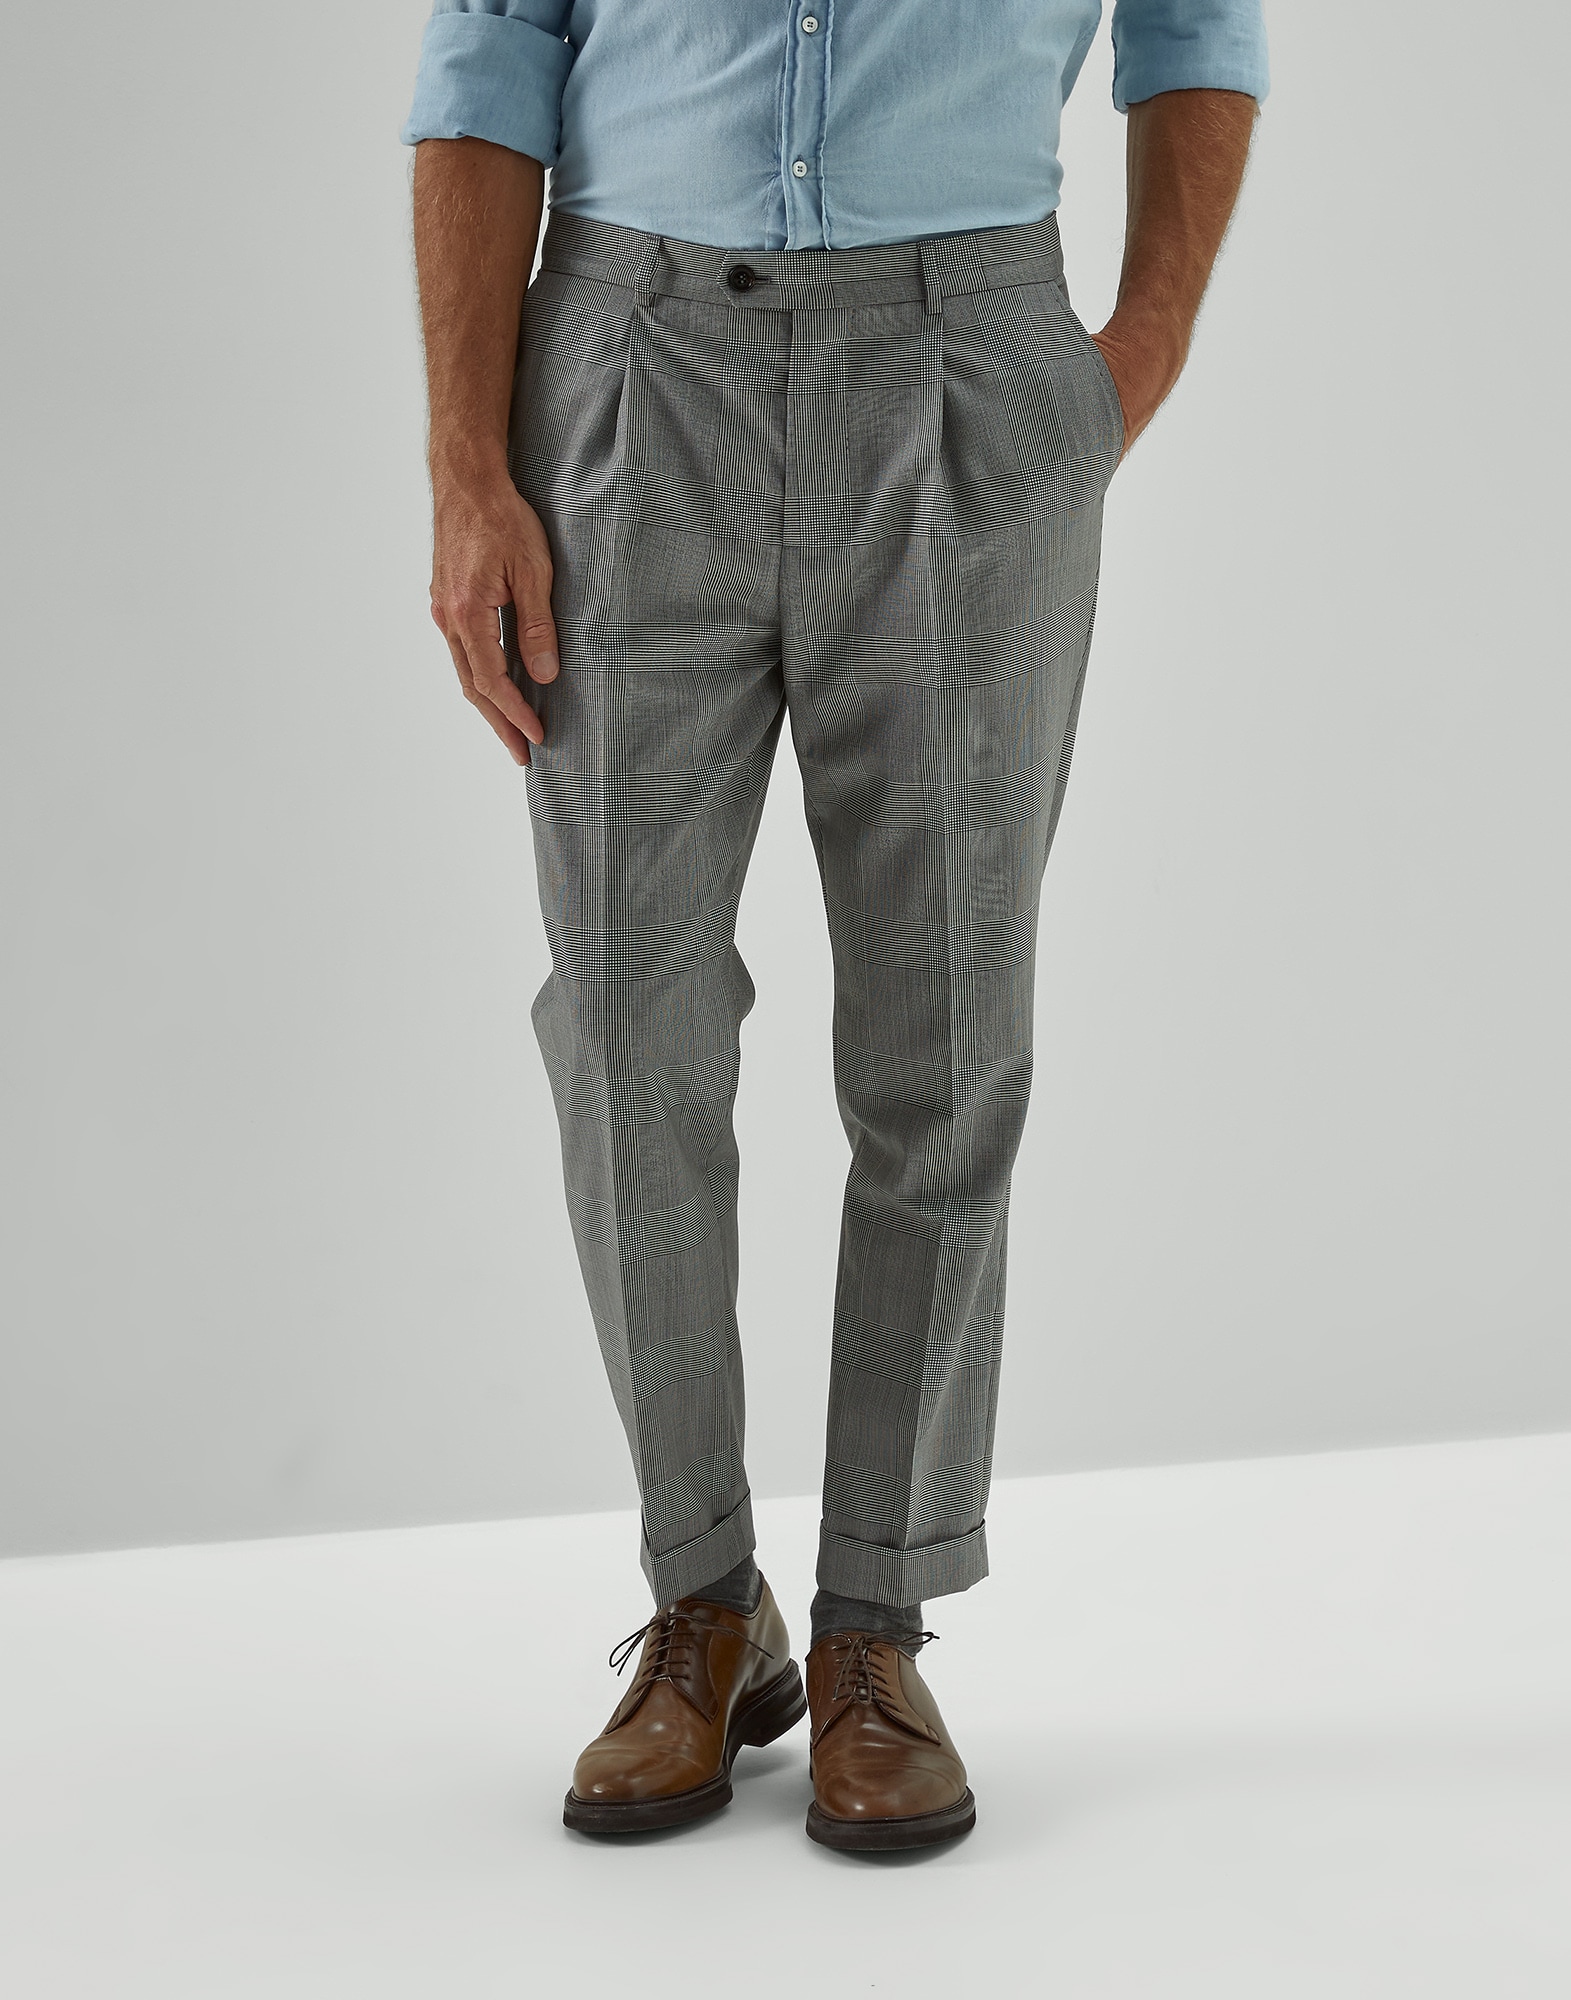 Prince of Wales trousers